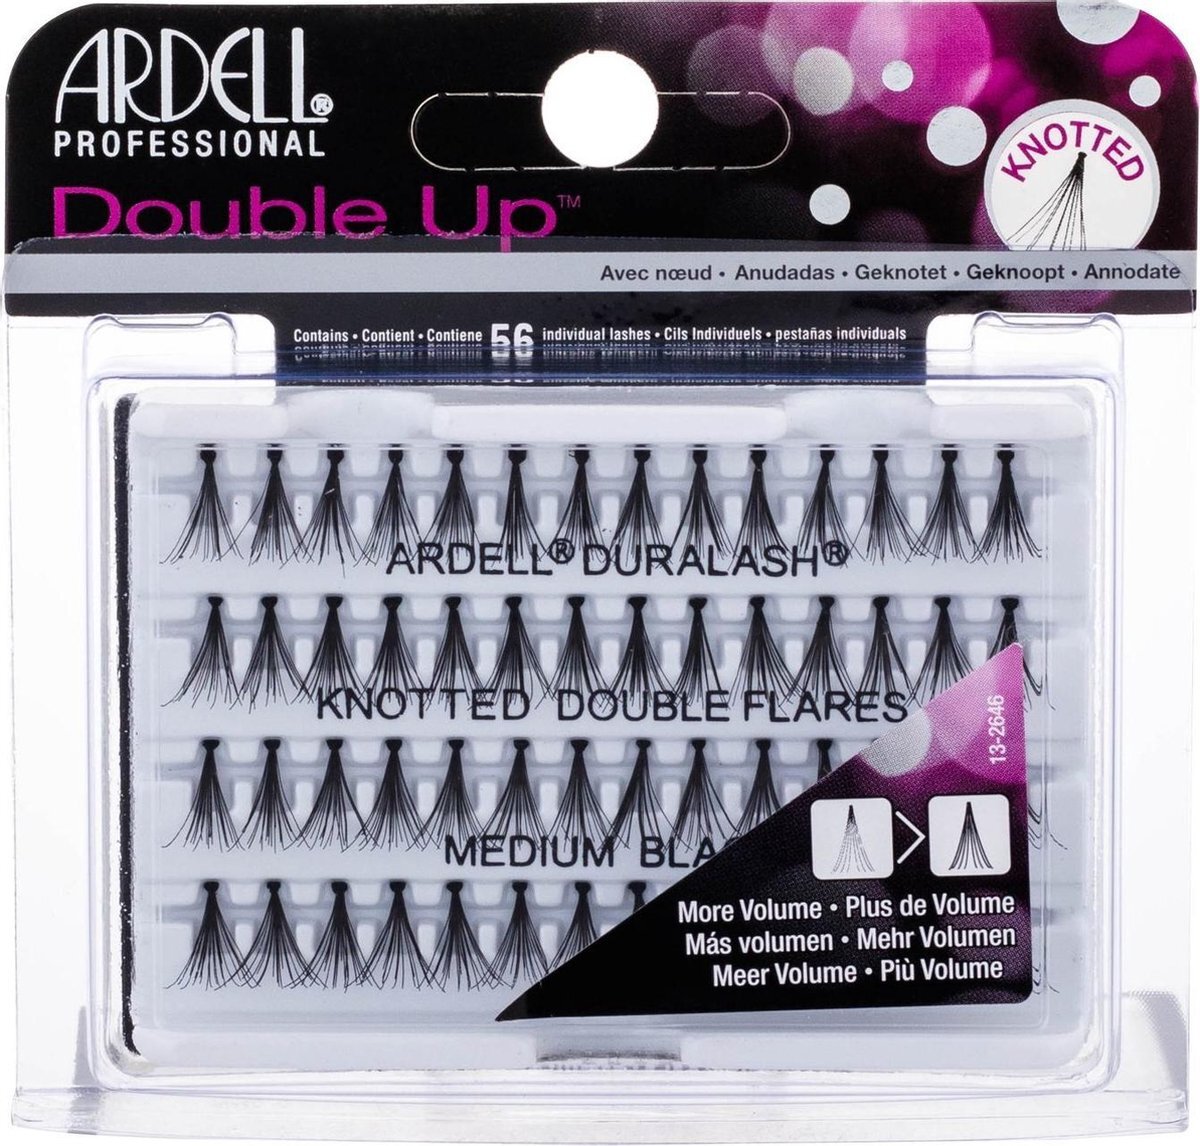 Ardell Double Up Individuals Knotted Medium wimperverzorging, zwart, 25 g